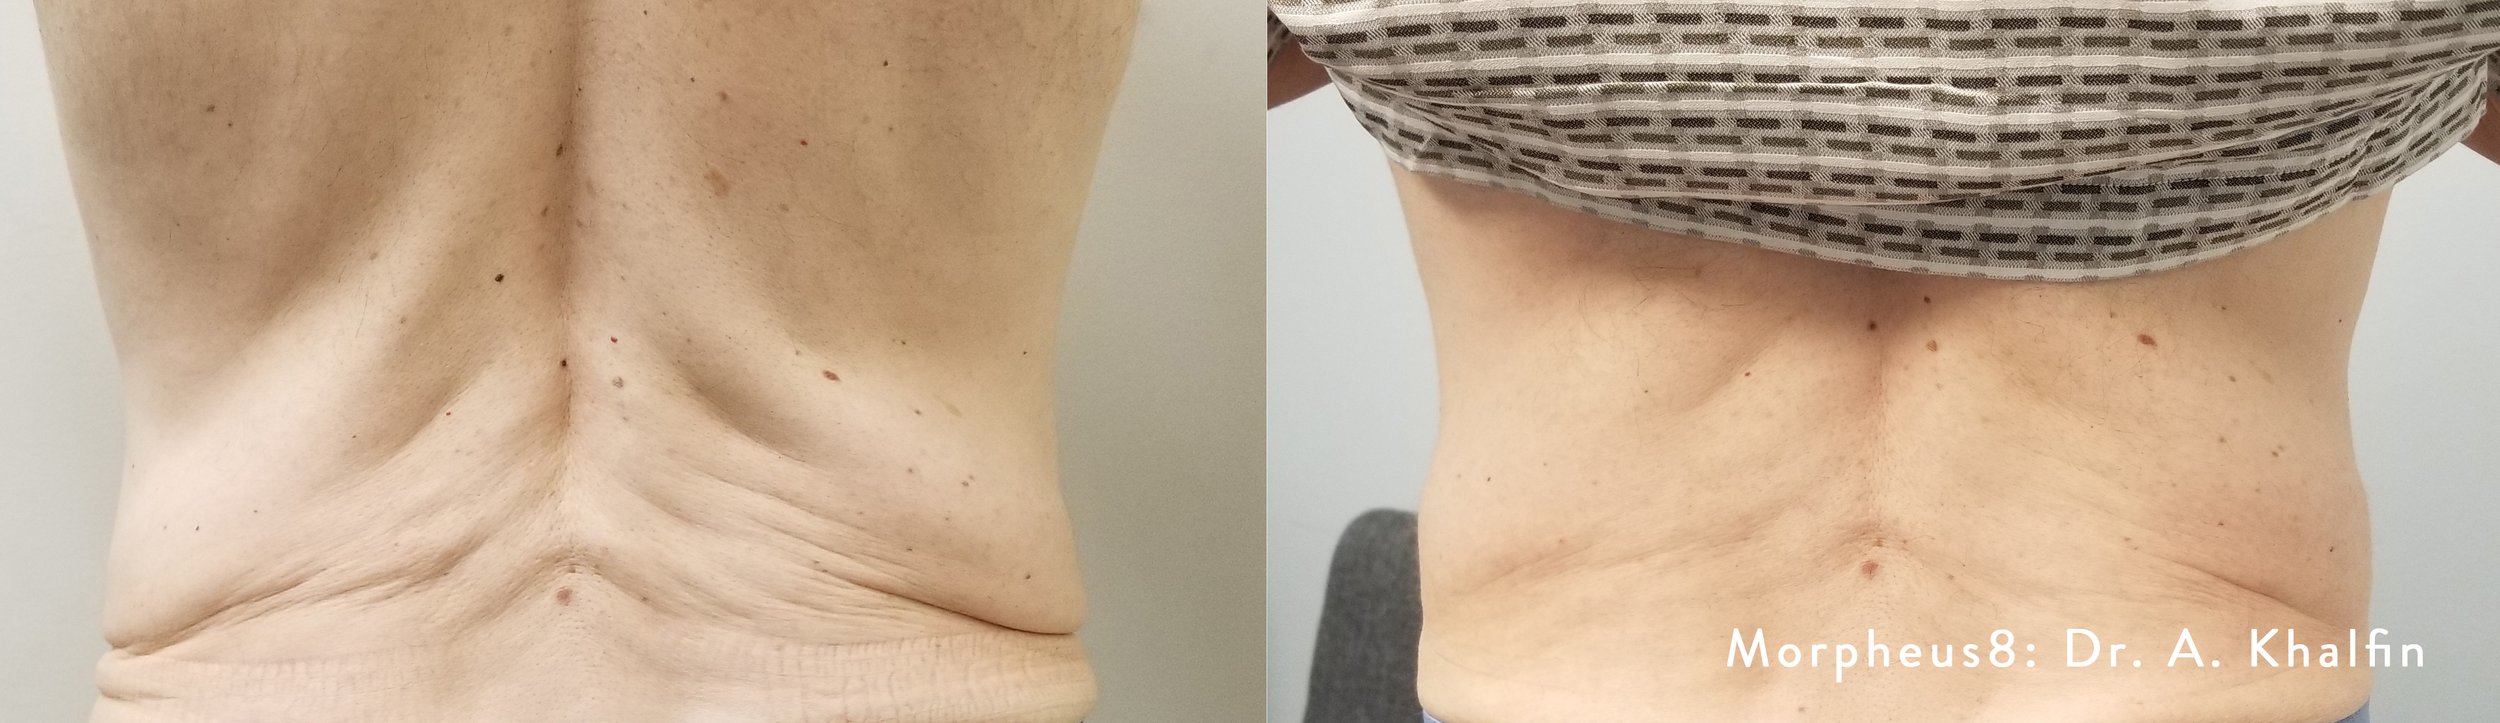 Morpheus8 Body results lower back before and after